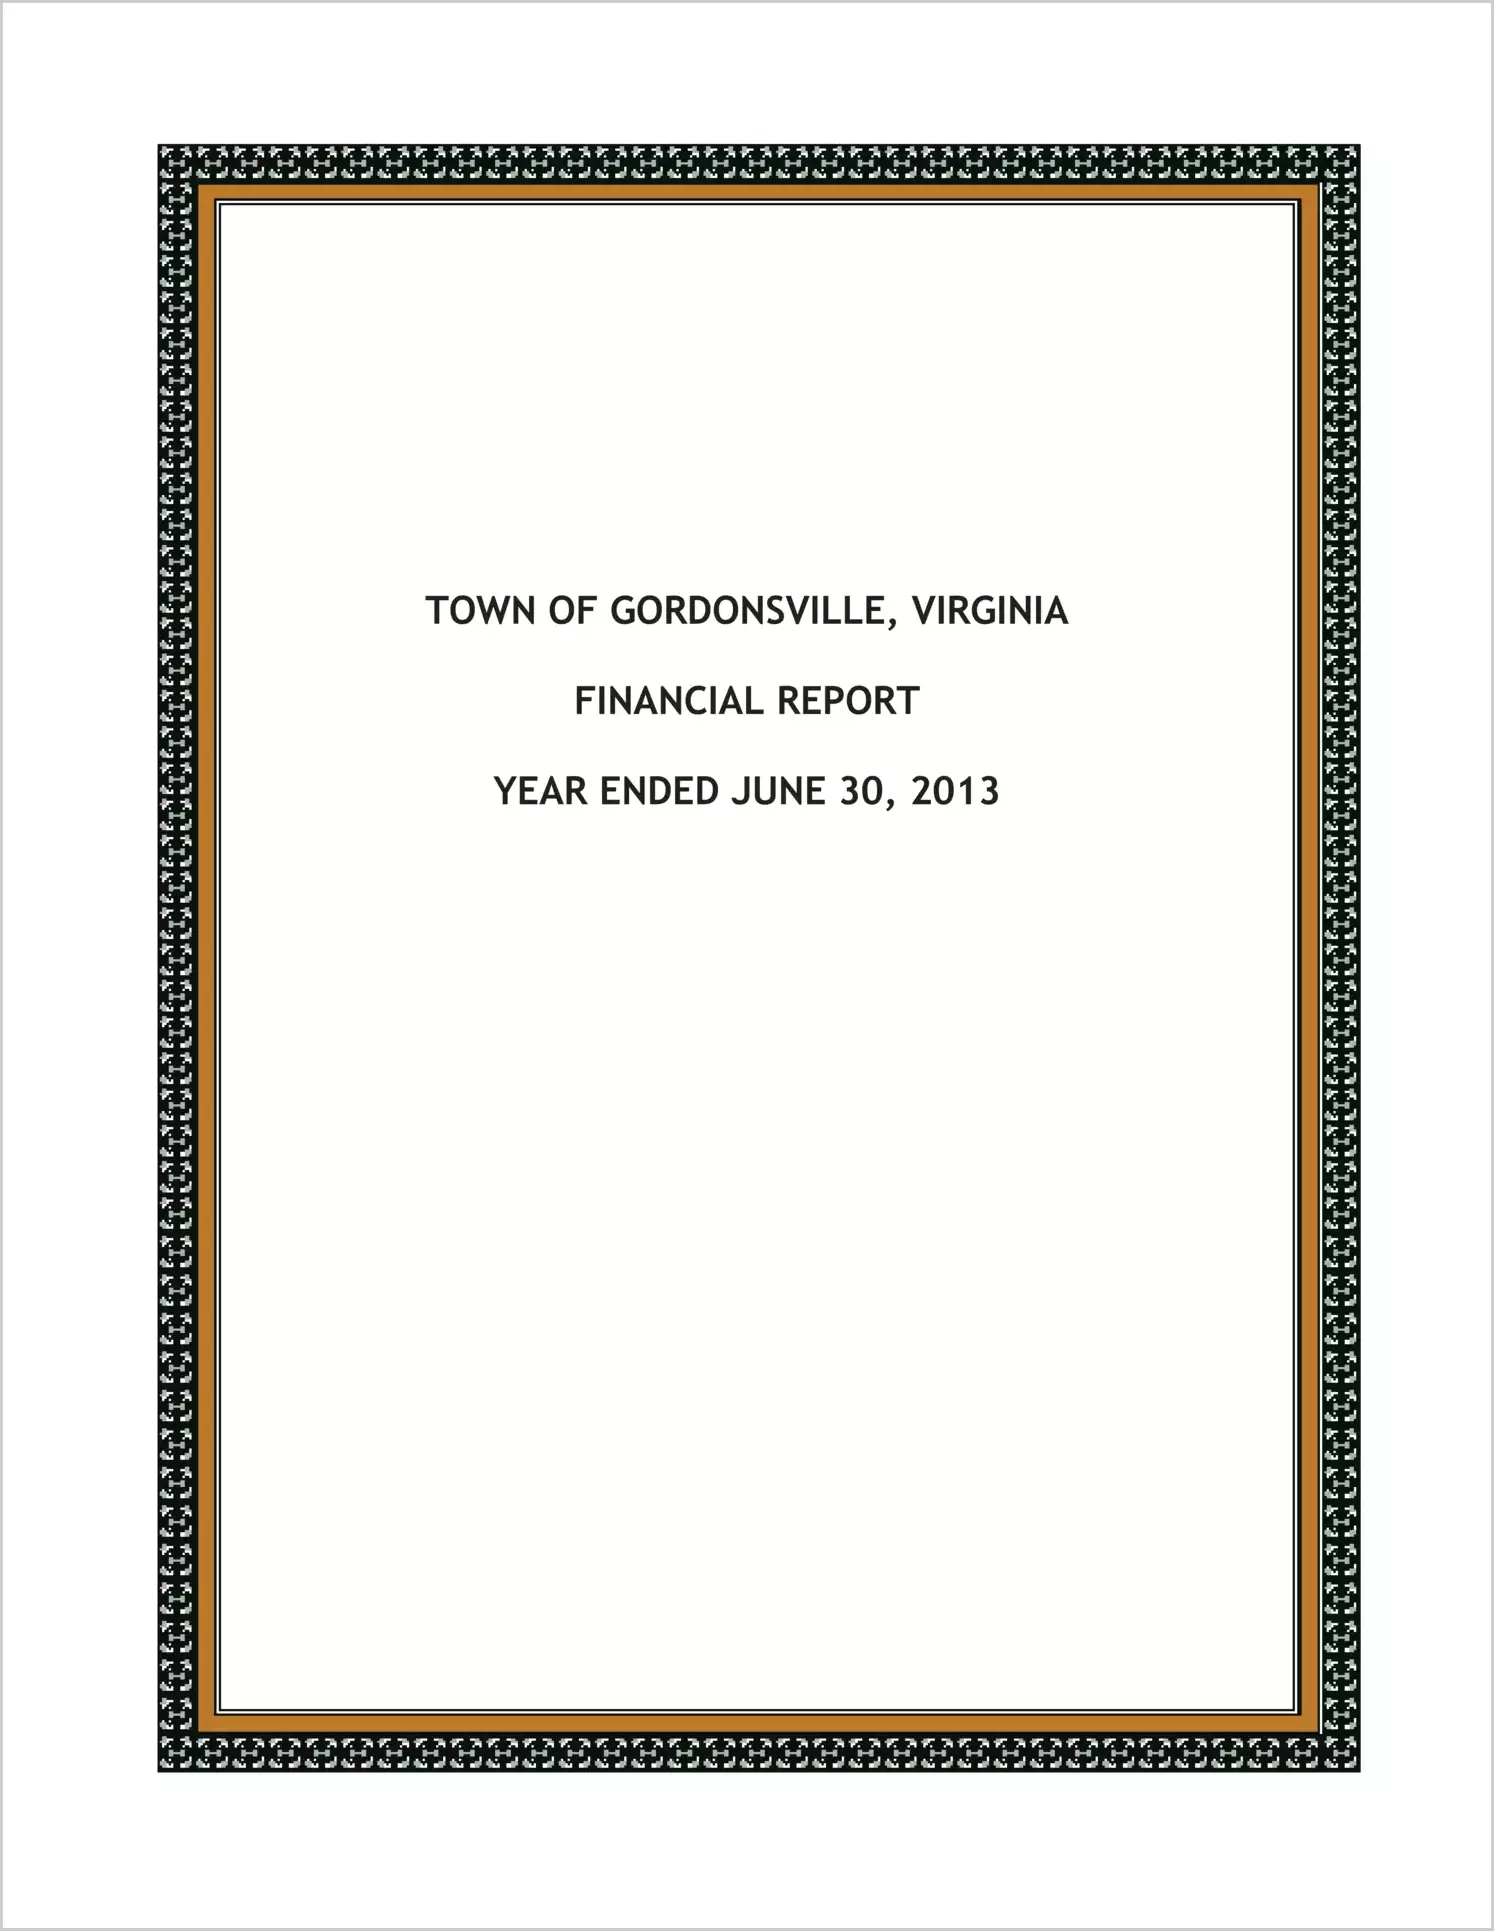 2013 Annual Financial Report for Town of Gordonsville